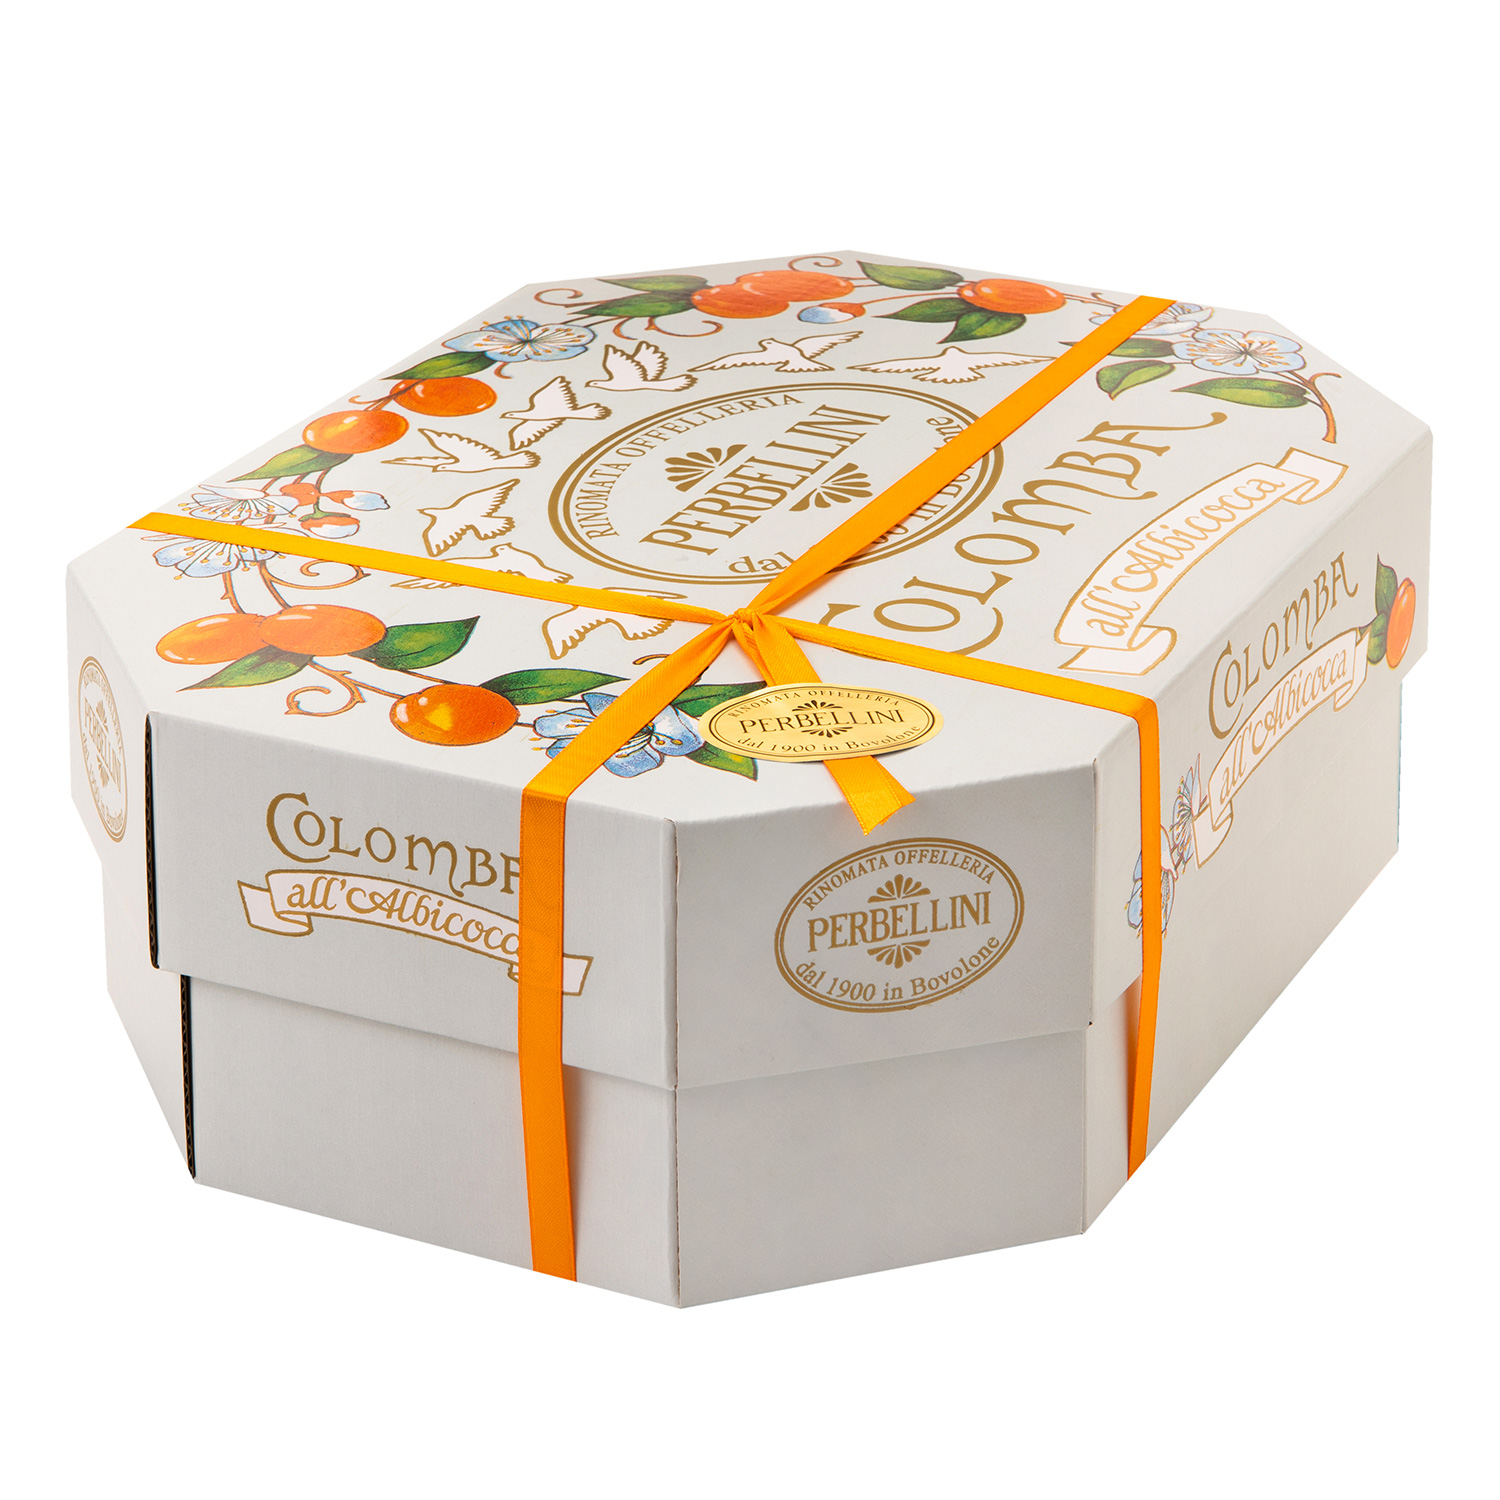 Apricot colomba Baked goods